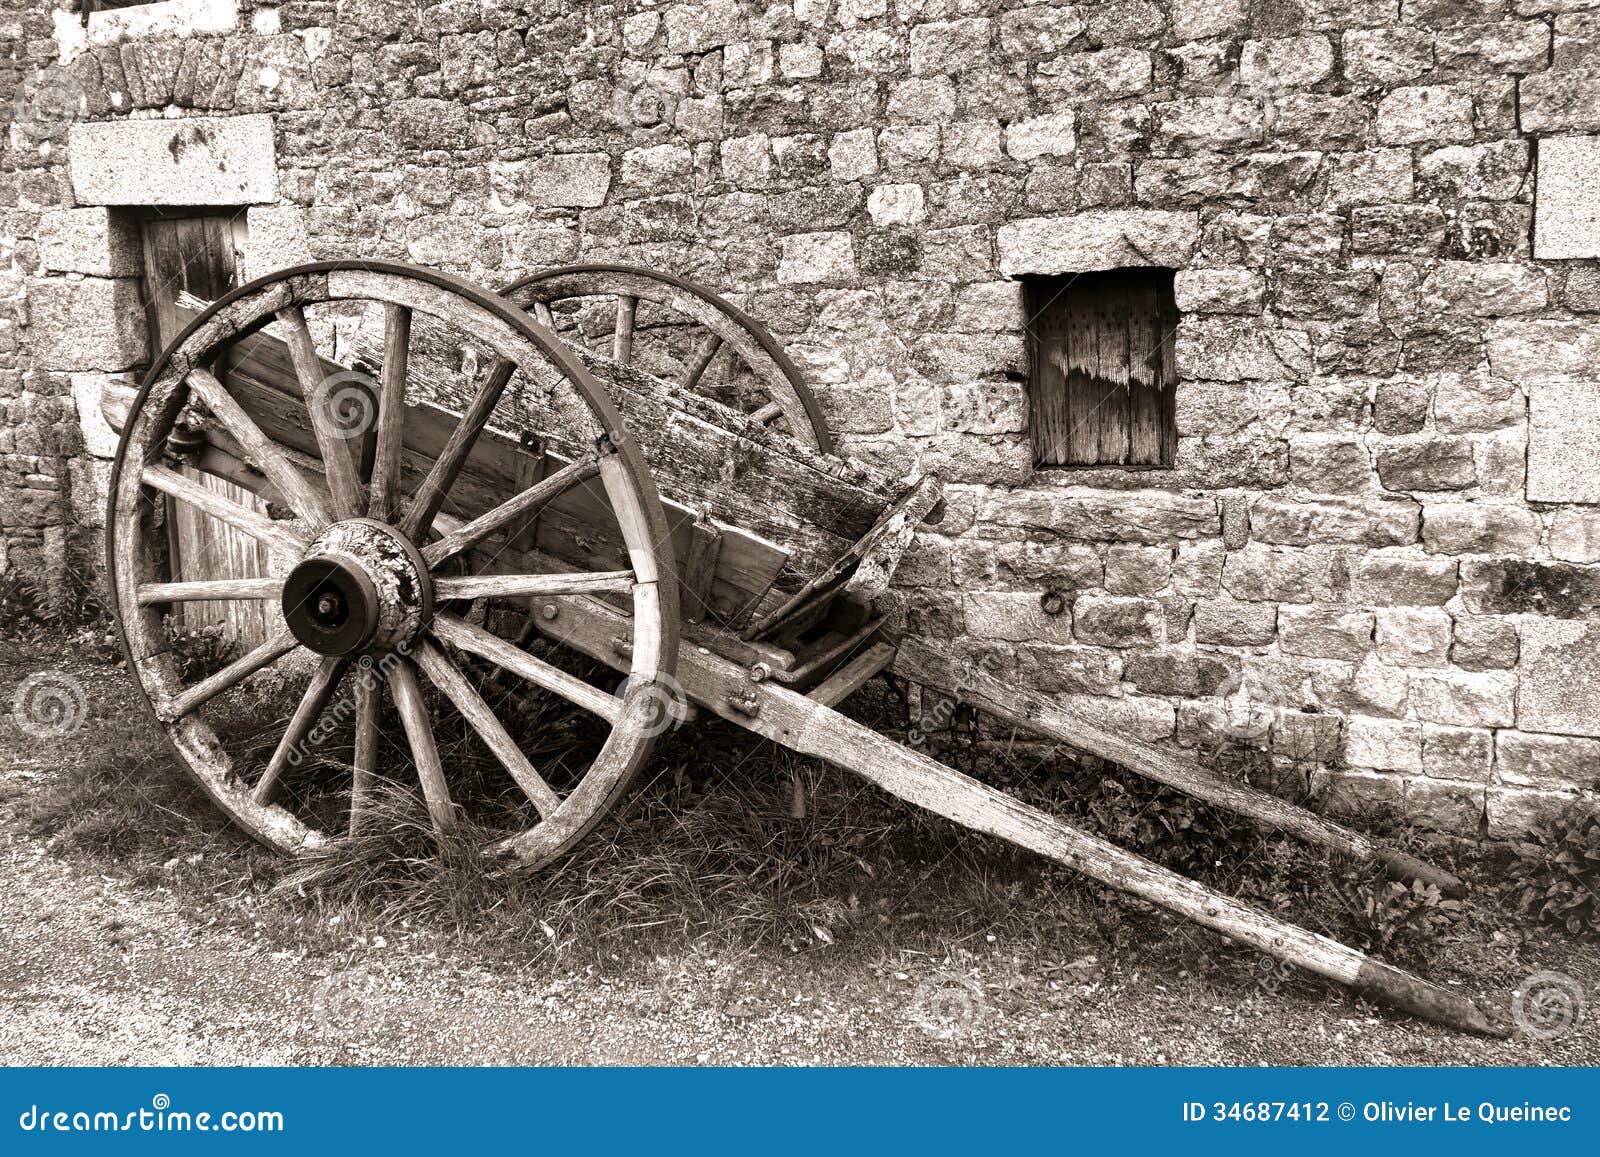 Antique Wood Wagon Wheel Carriage Cart At Old Farm Stock Photography 